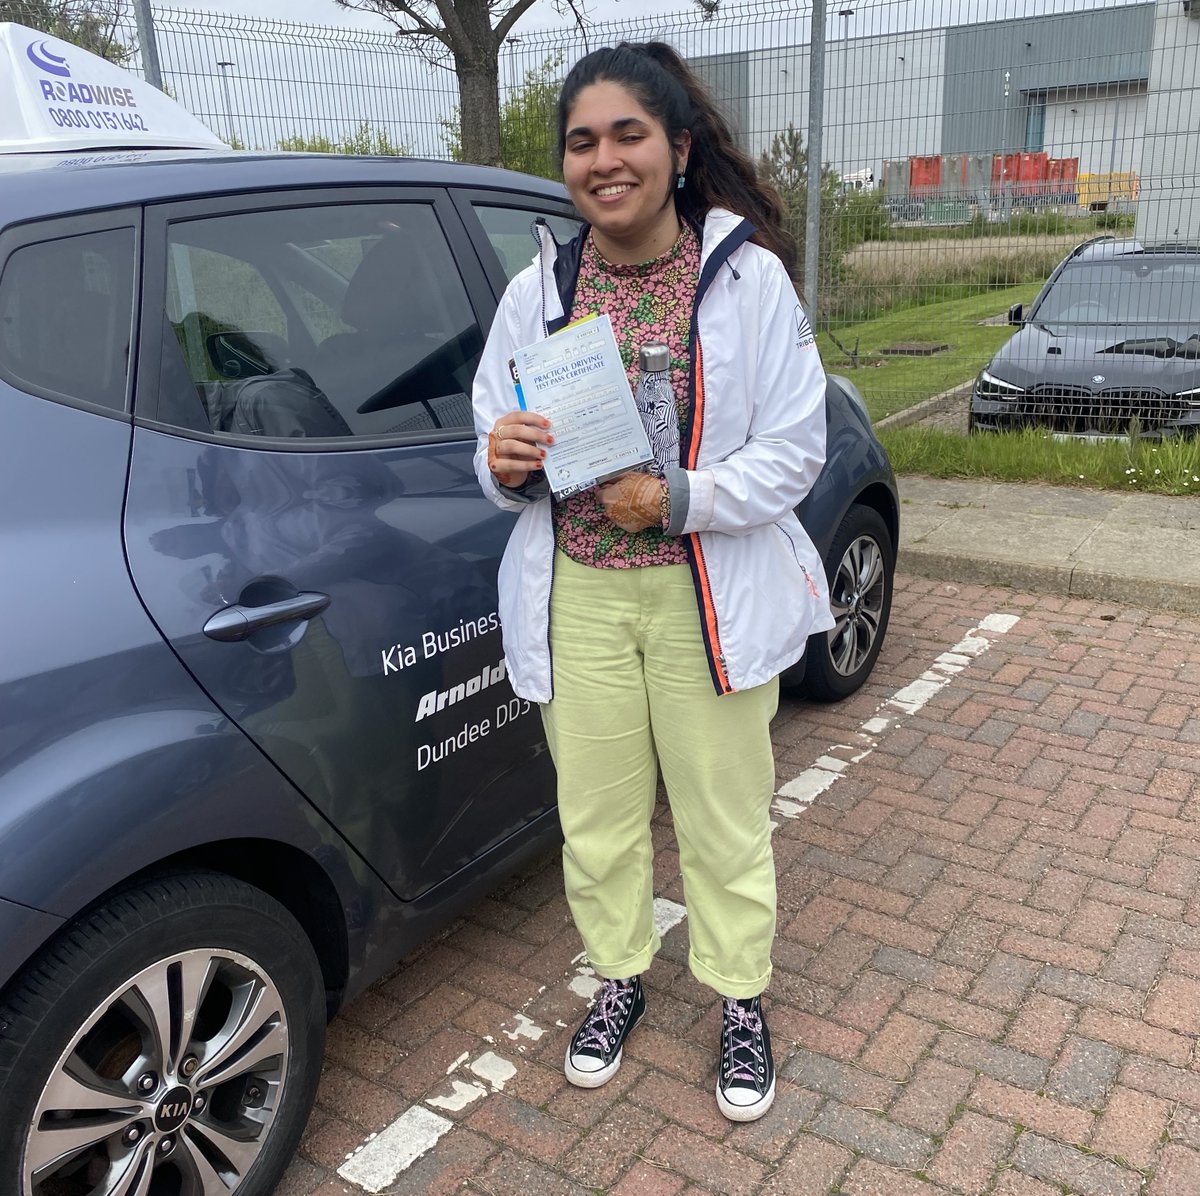 Congratulations Eliza today on your pass and drive safe, from Instructor Gerald and the team at Roadwise!

👉Get in Touch!
☎️08000 151 642
✉️info@roadwisedrivertraining.co.uk
#passwithRoadwise #learntodrive